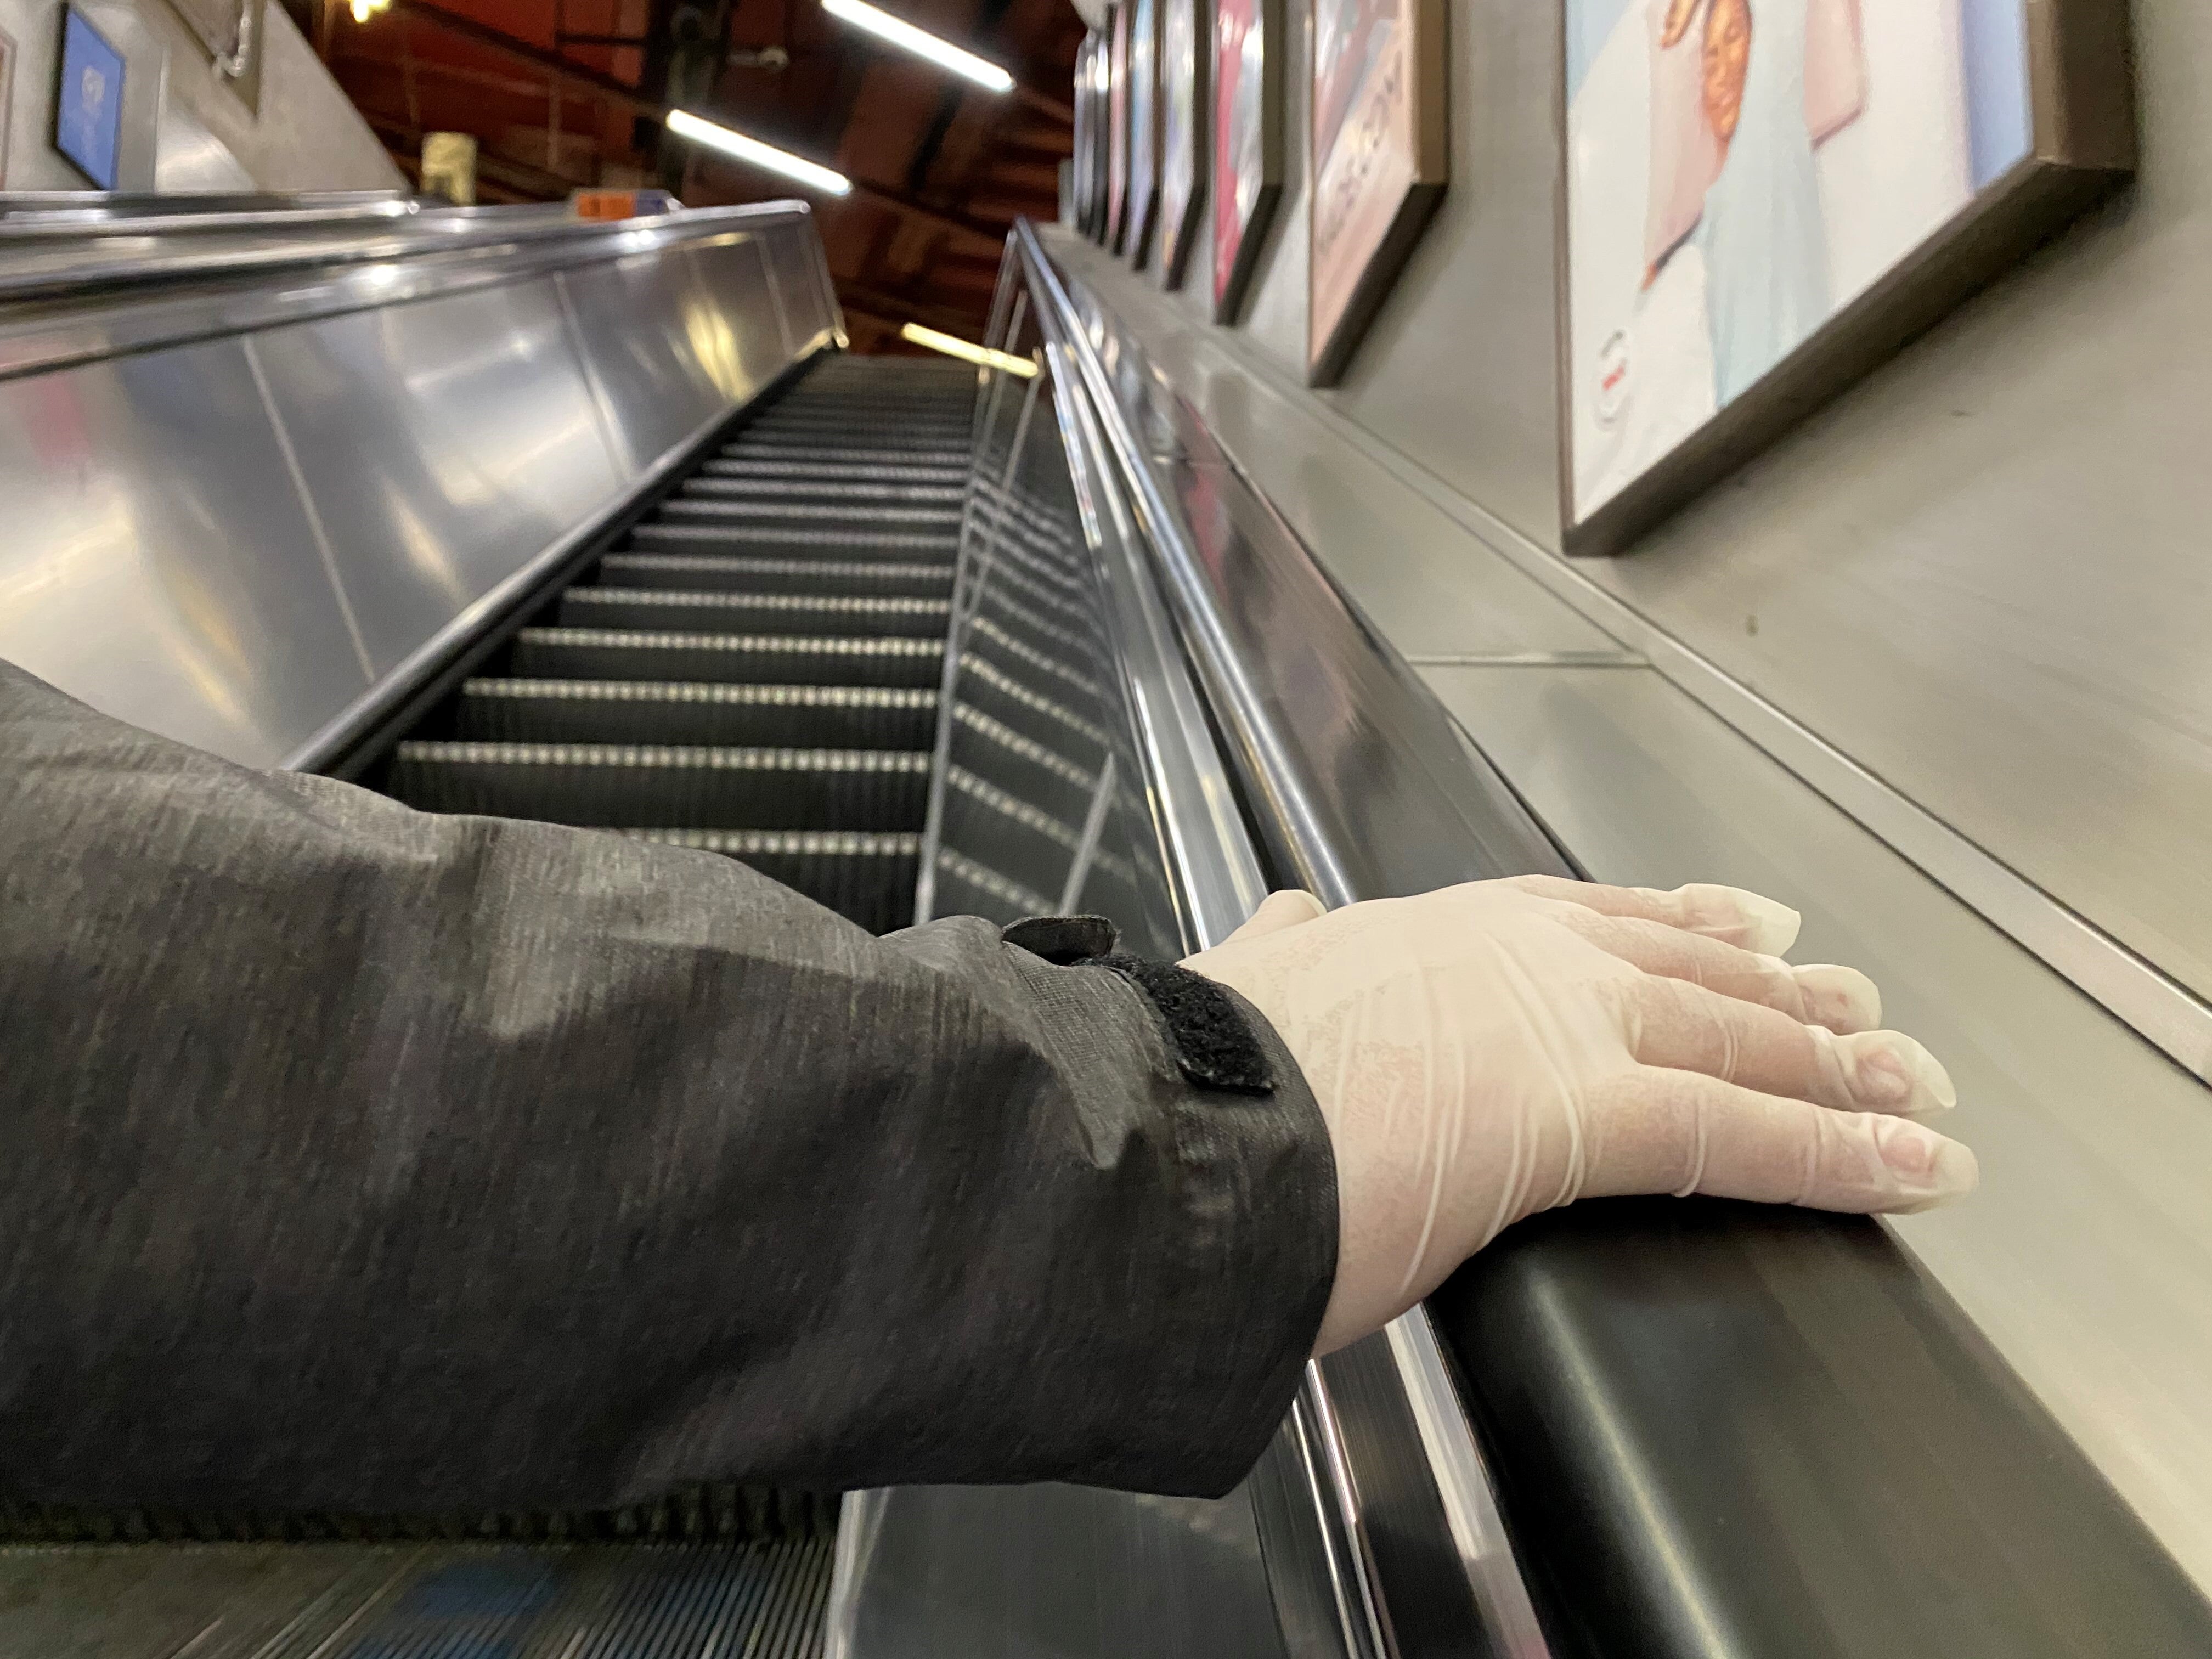 A person with a gloved hand uses an escalator in Baker Street Underground Station in London (Luciana Guerra/PA)